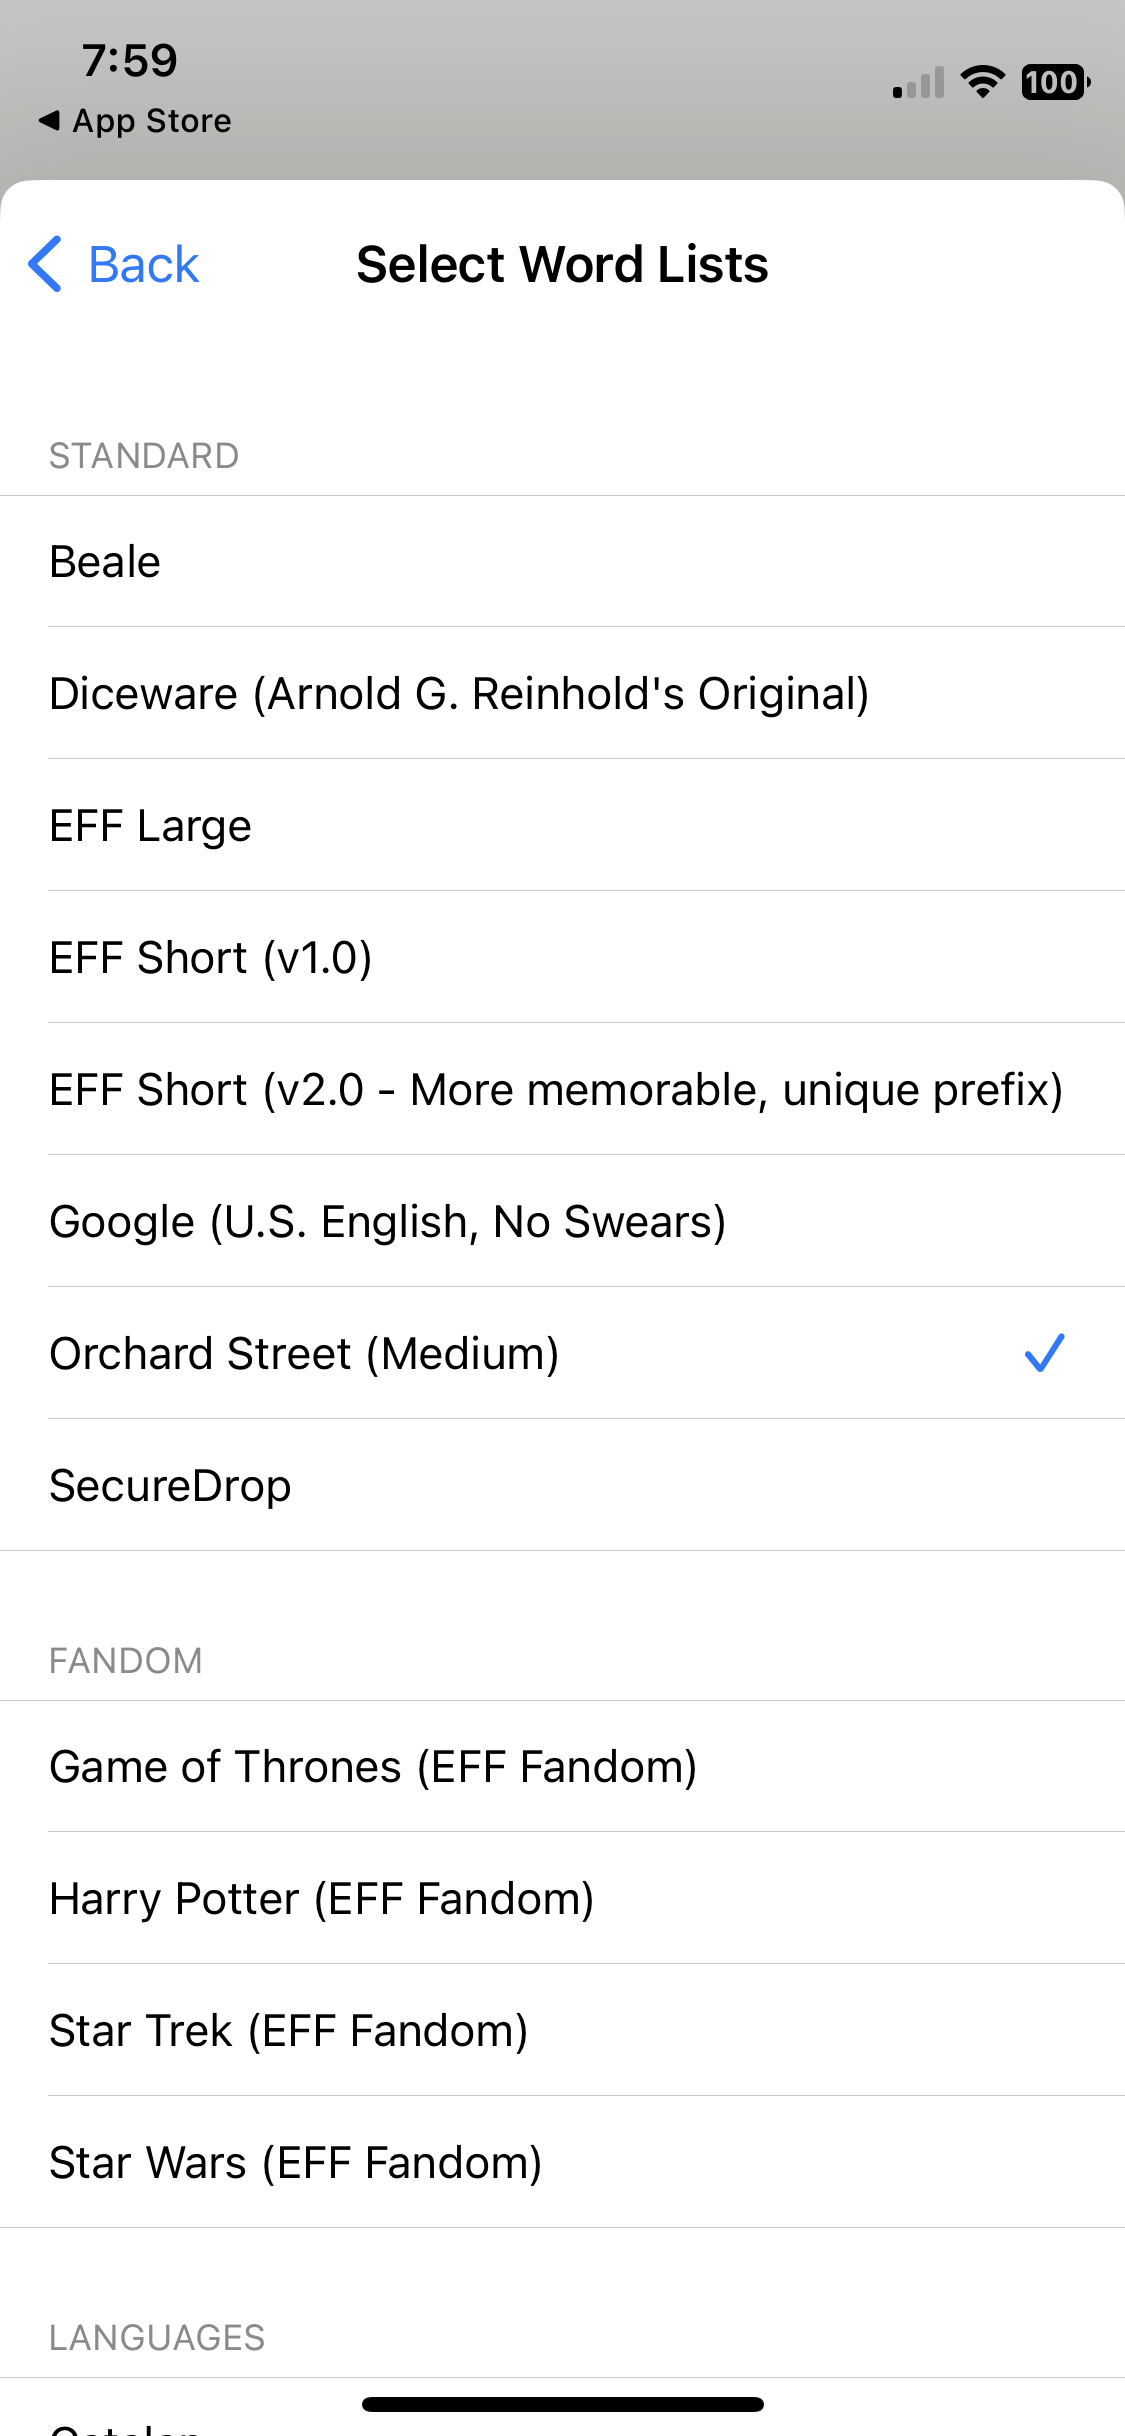 Screenshot of Strongbox password manager iOS app. Menu is labeled "Select Word Lists". Among the options is "Orchard Street (Medium)", which is selected.